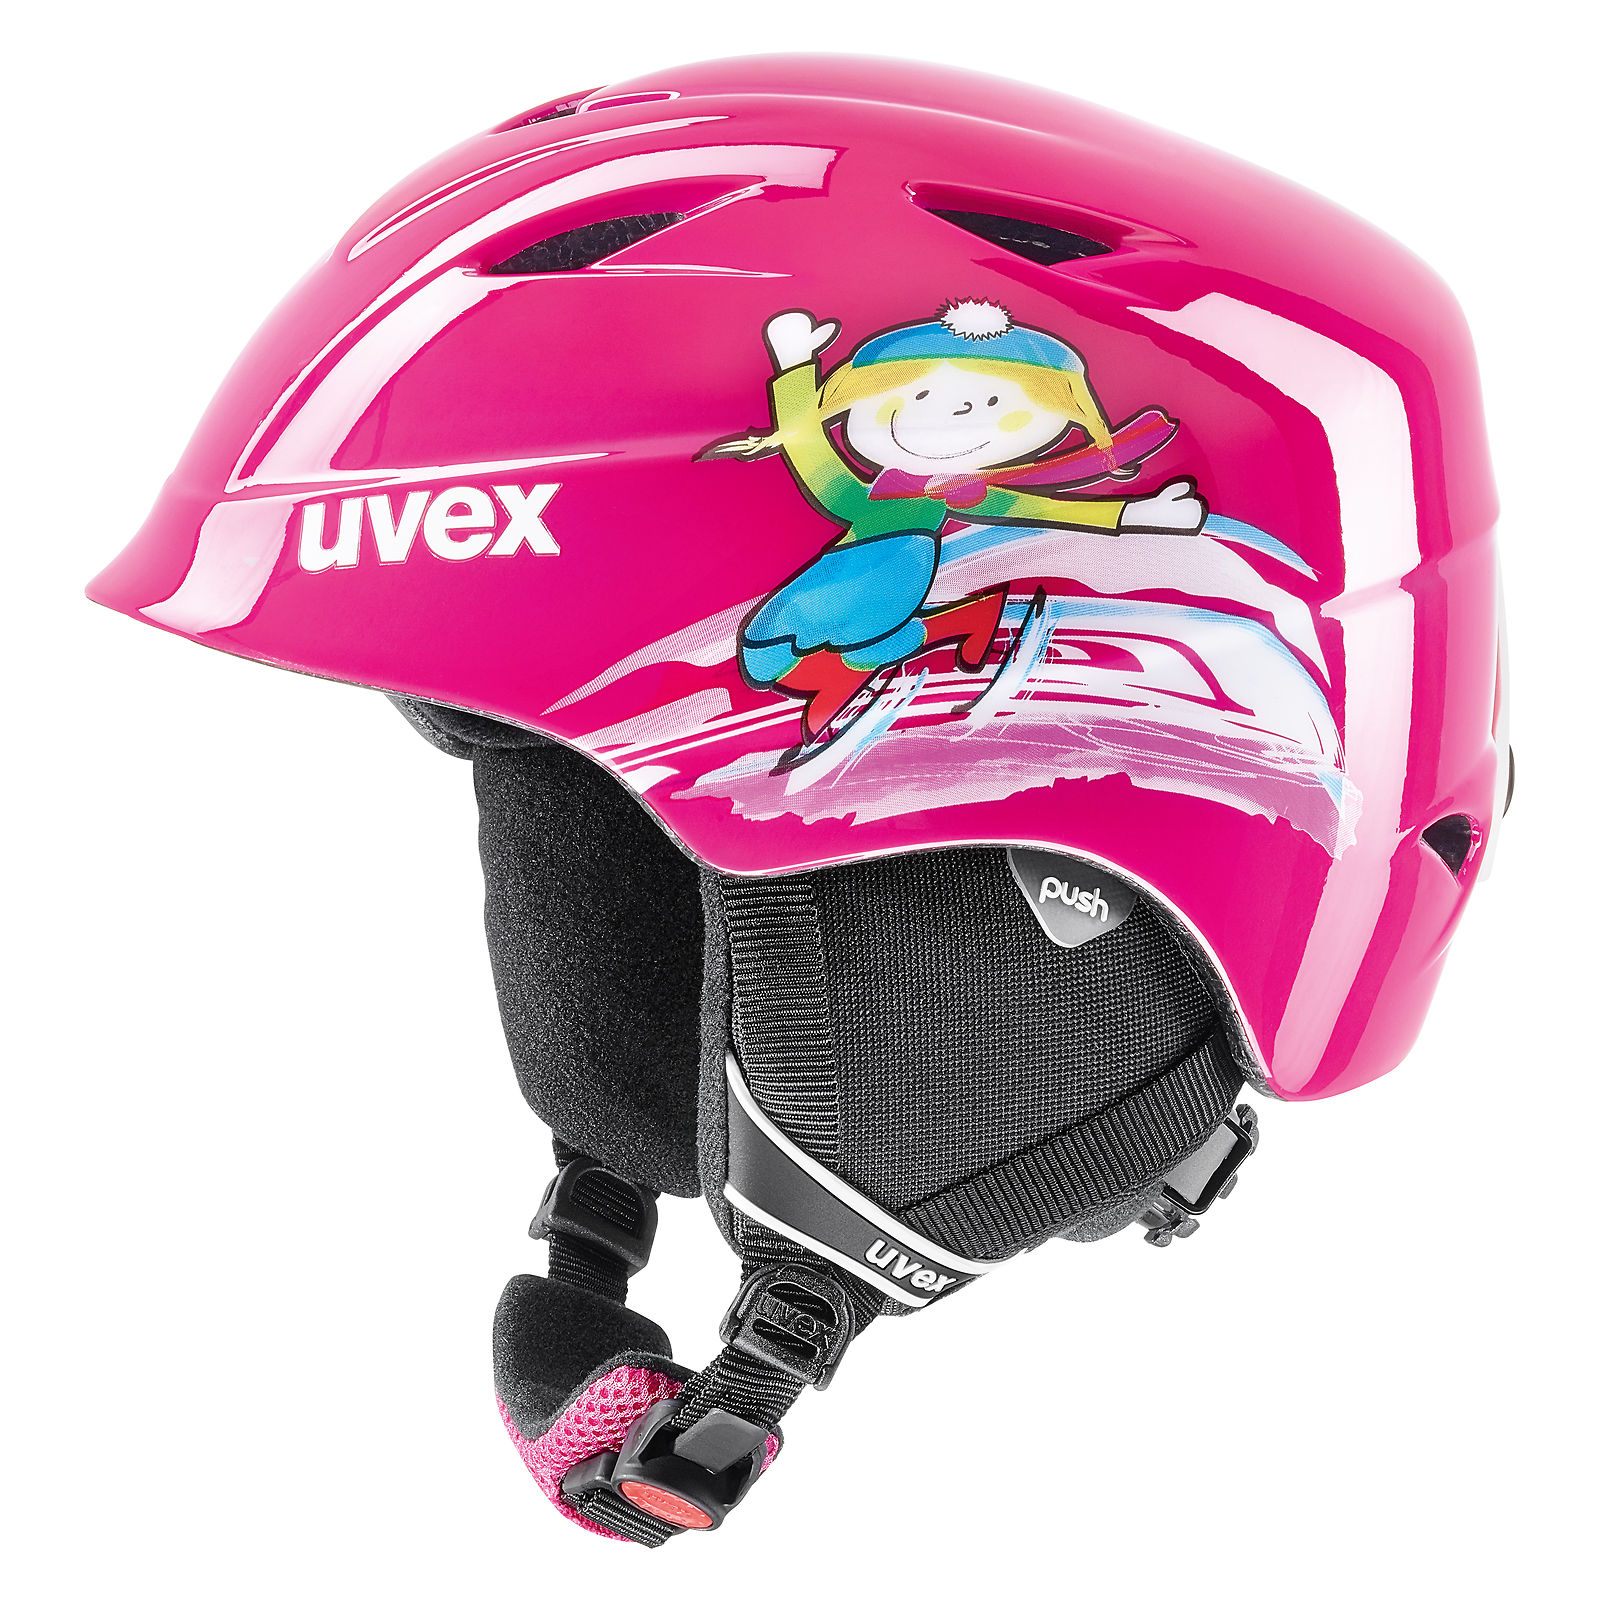 Kask Uvex Airwing 2 pro 566132